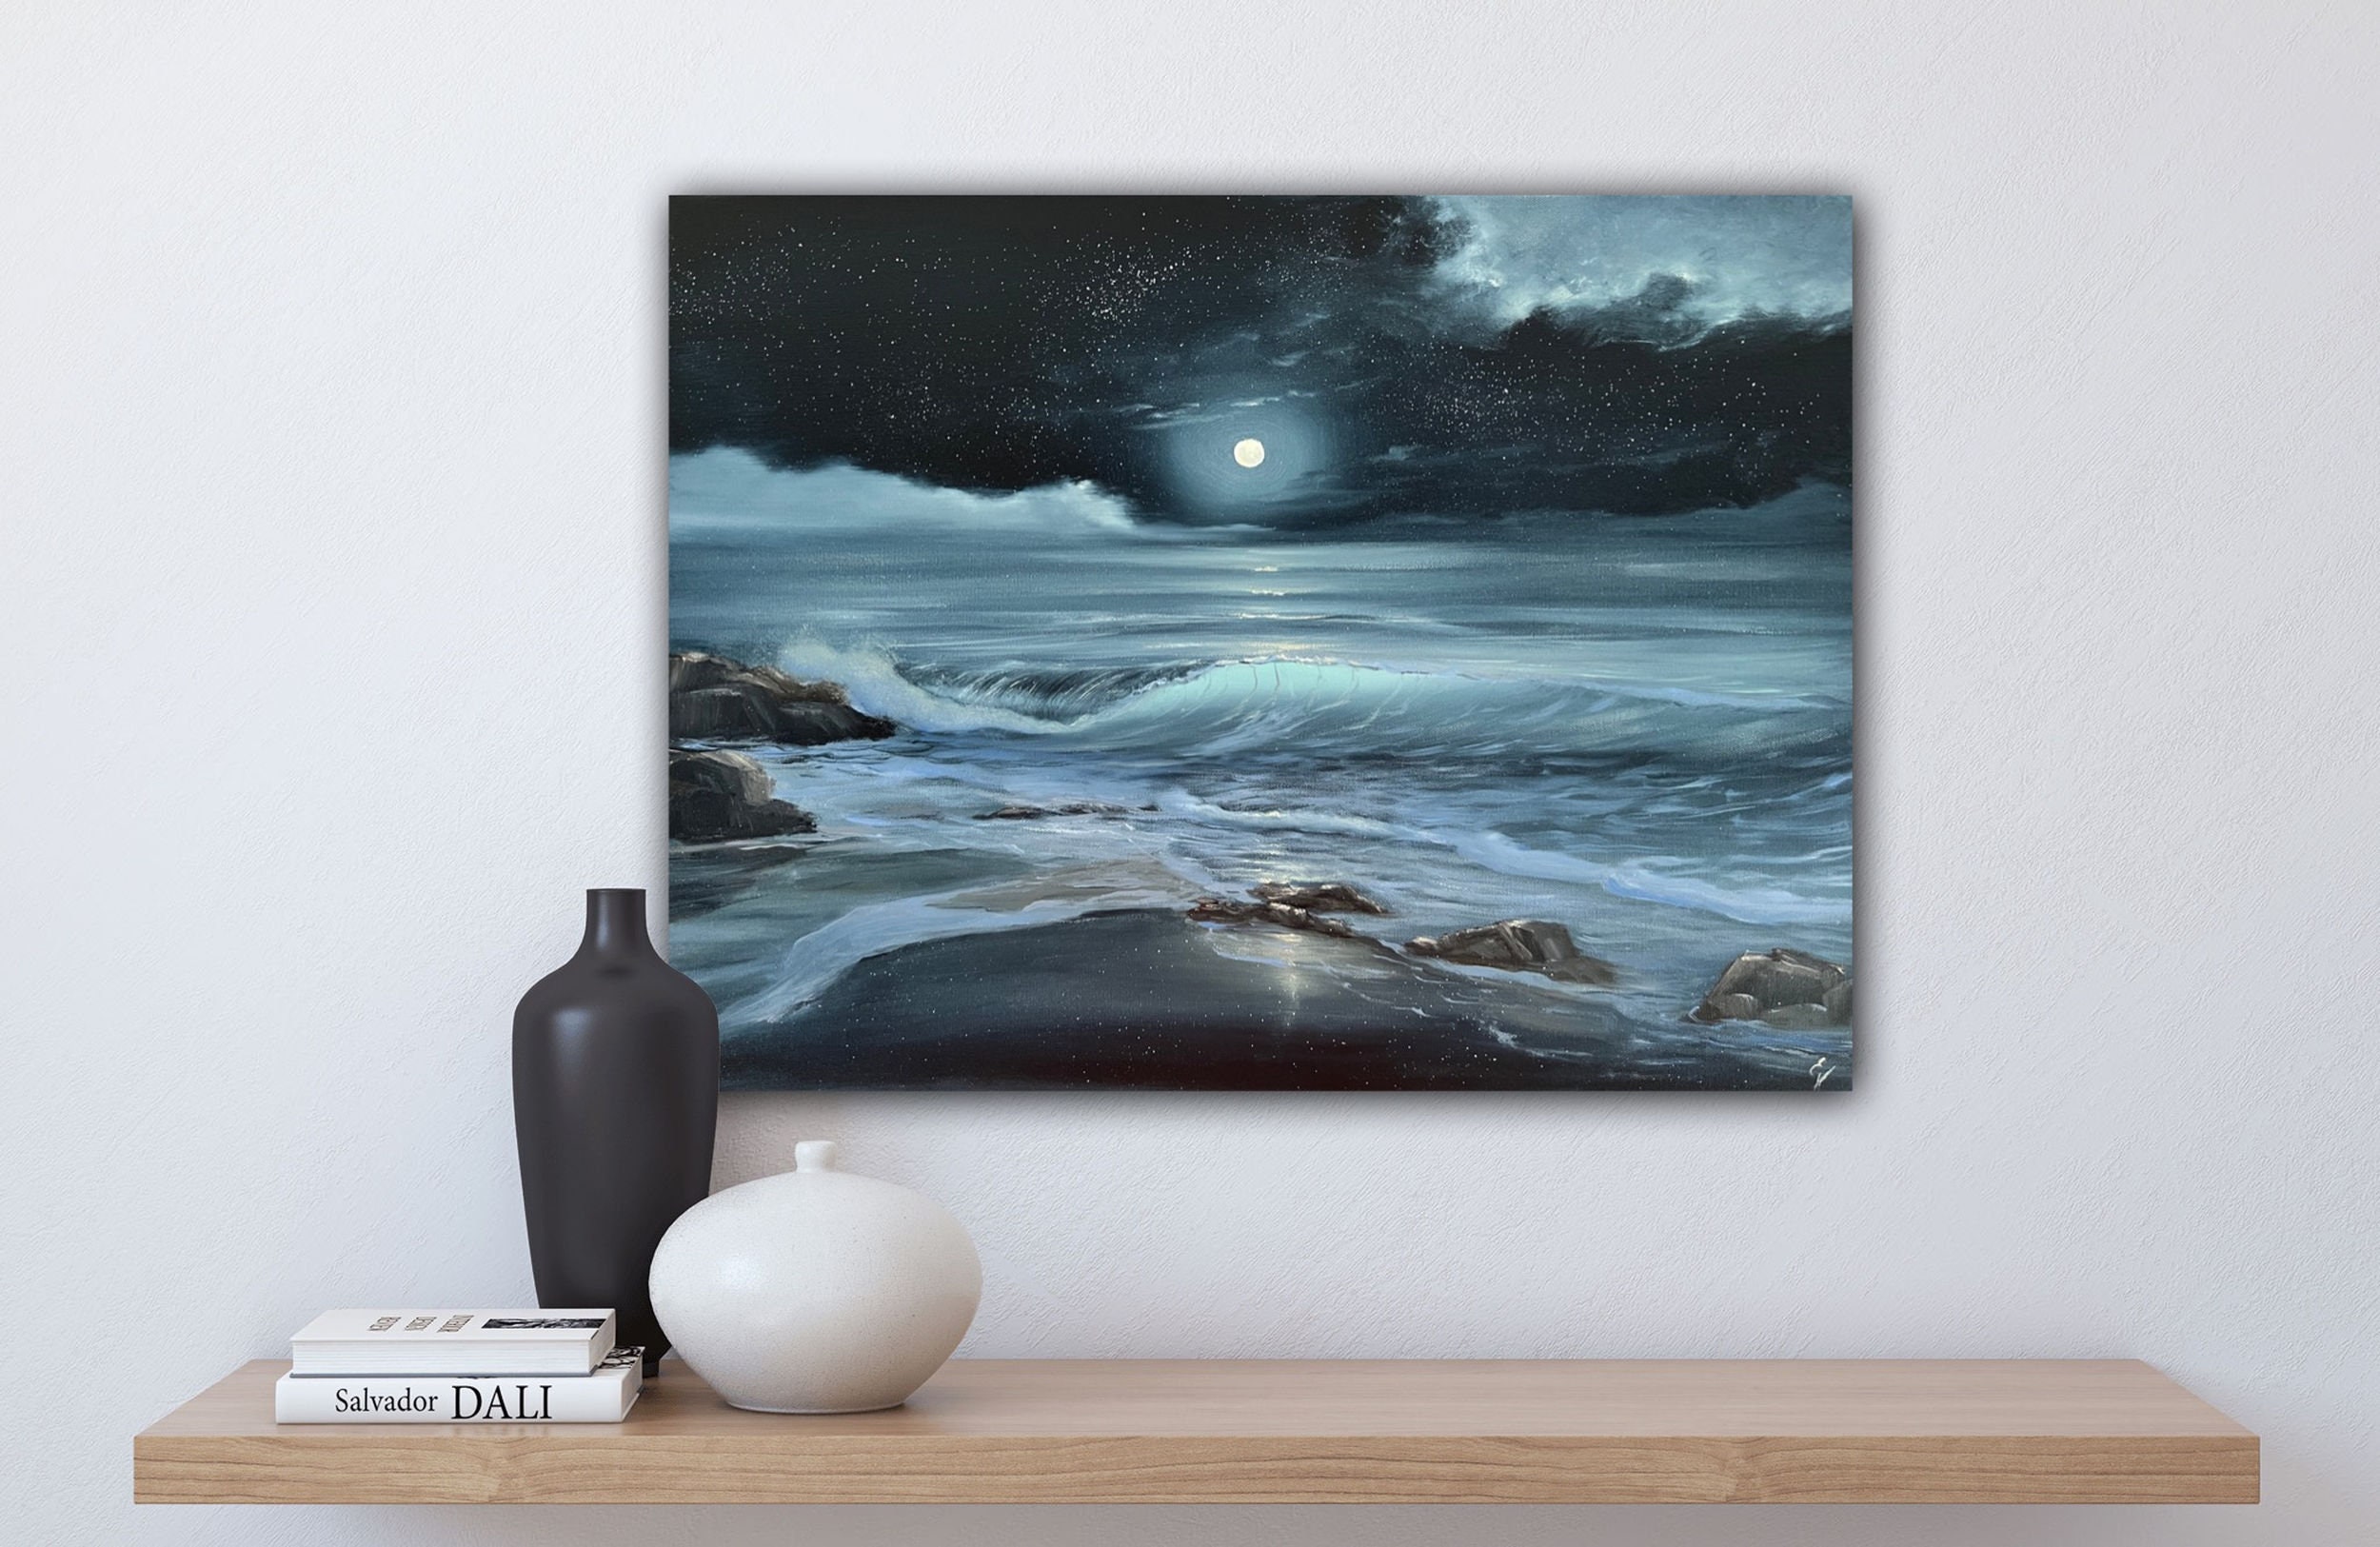 Emerging Light - Original Realistic Seascape Painting oil on round 24  canvas